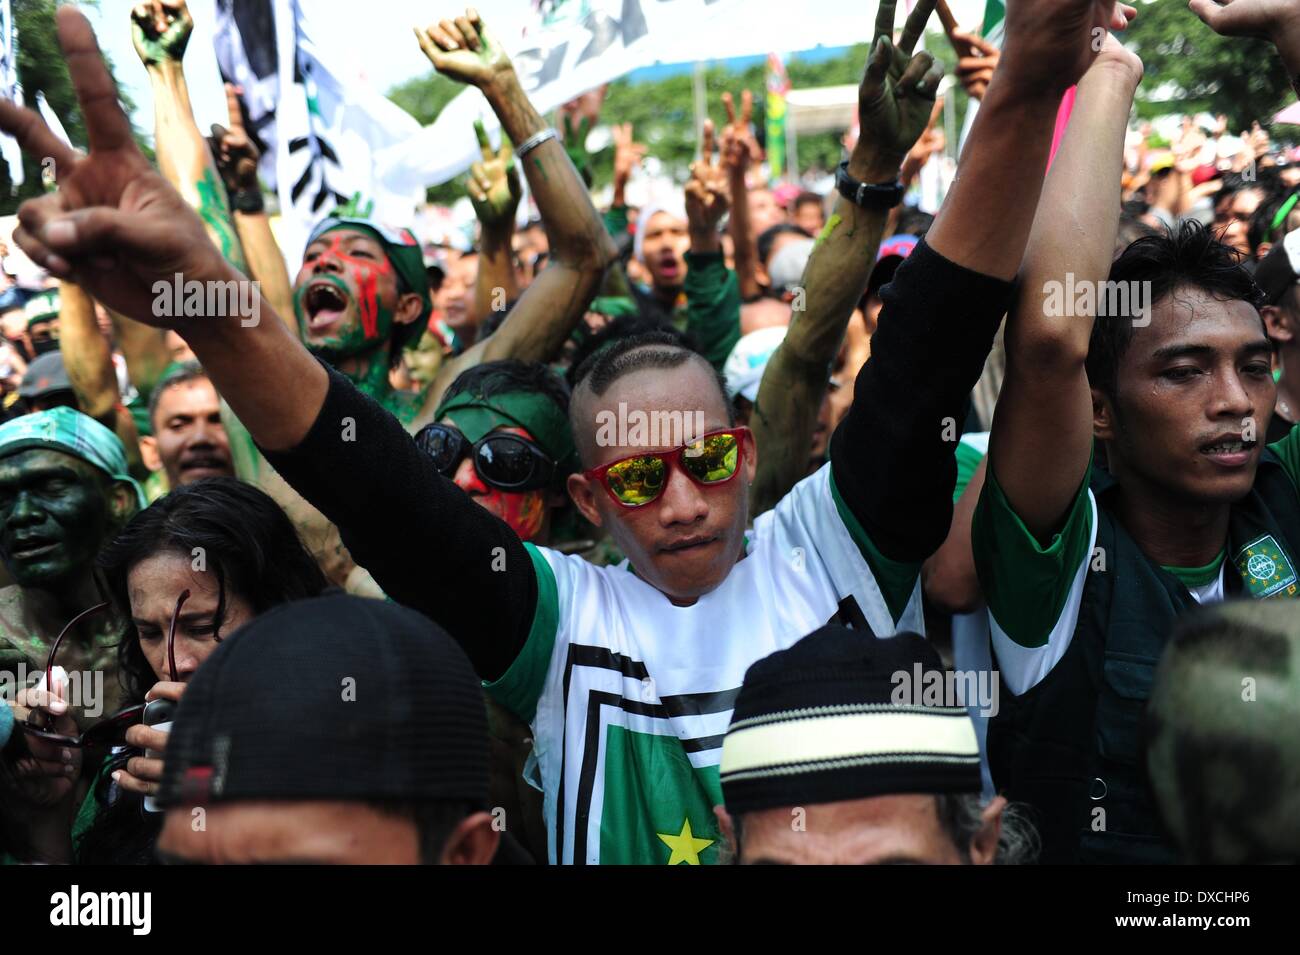 Jakarta, Indonesia. 24th Mar, 2014. Supporters of Nation Awakening Party (PKB) take part in a campaign rally in Jakarta, Indonesia, March 24, 2014. Indonesia is to hold direct legislative elections on April 9 and direct presidential polls on July 9. Credit:  Zulkarnain/Xinhua/Alamy Live News Stock Photo